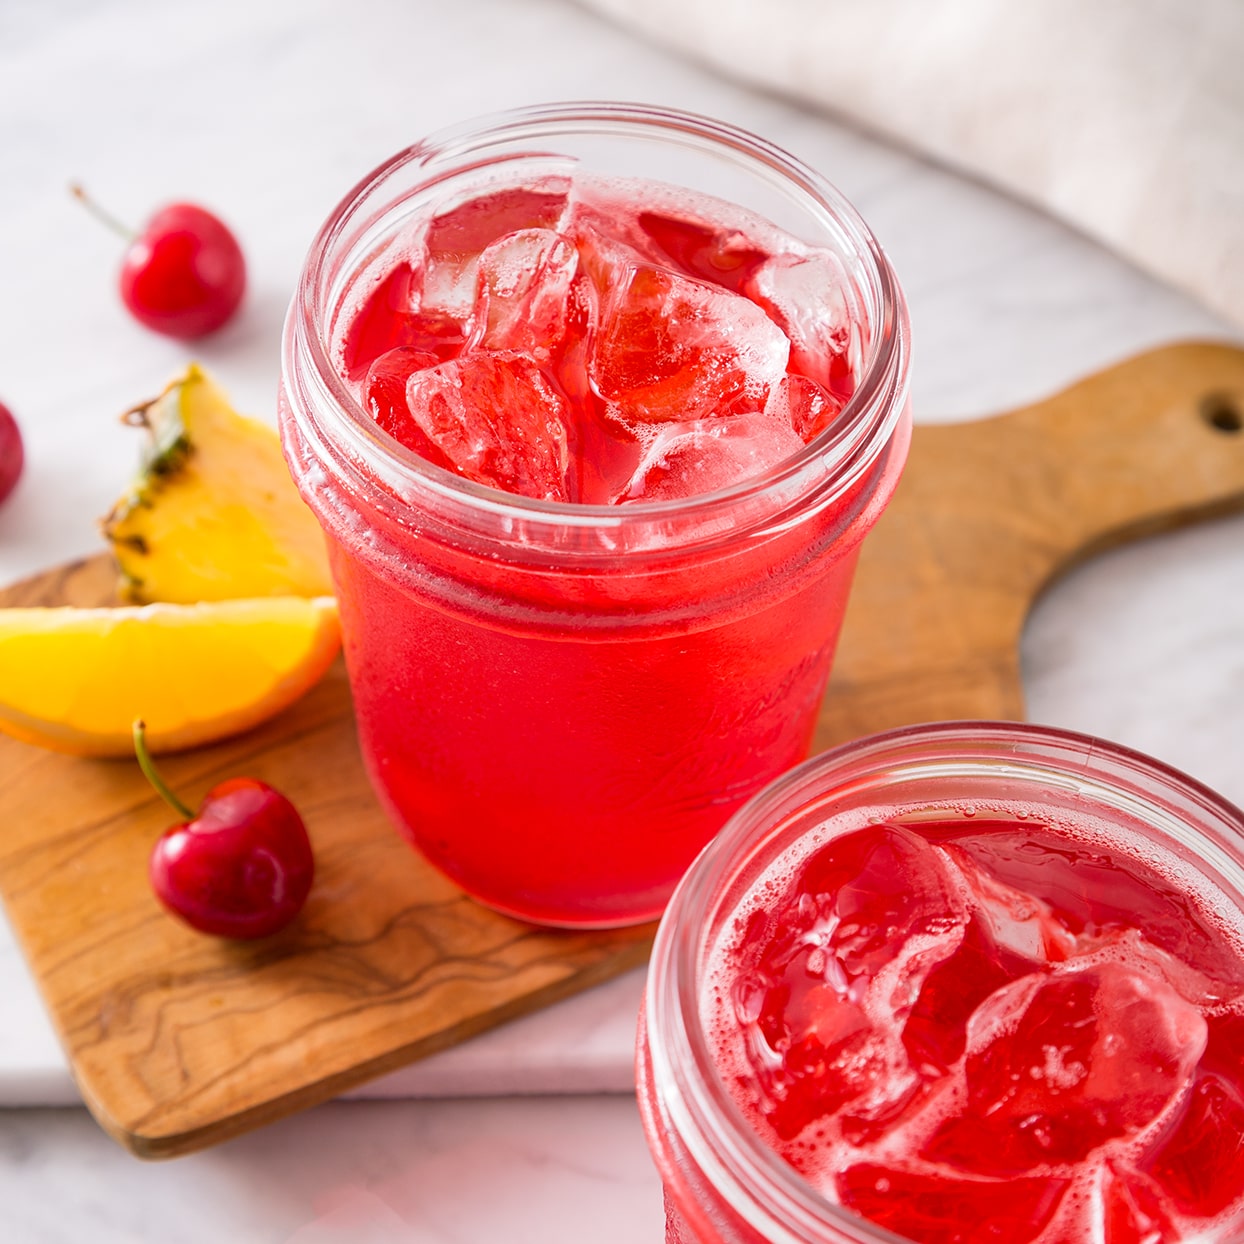 https://www.nutritionforstrength.com/nutrition-for-your-fight/nutritional-drinks/ensure-clear/institutional-nutritional-mixed-berry-drink/_jcr_content/root/container_1272059613/flavouricon/columncontrol/tab_item_no_1/herocarousel_copy_co/image_copy.coreimg.jpeg/1643353904911/ensure-clear-mixedfruit.jpeg